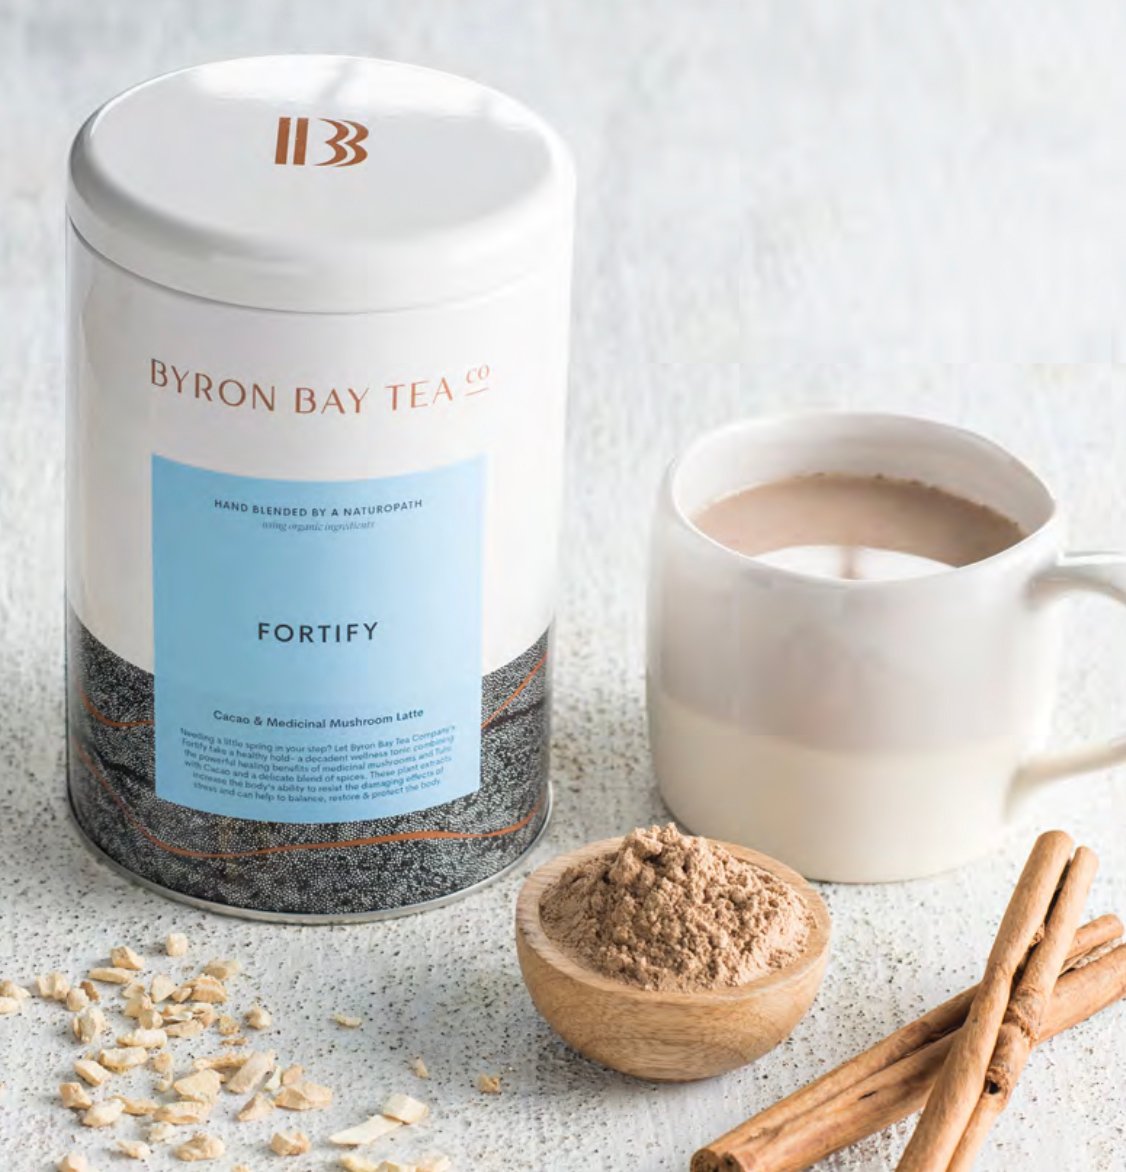 Byron Bay Tea Company fortify leaf tin with cup of fortify and bowl of tea leaf powder and cinnamon stick next to it